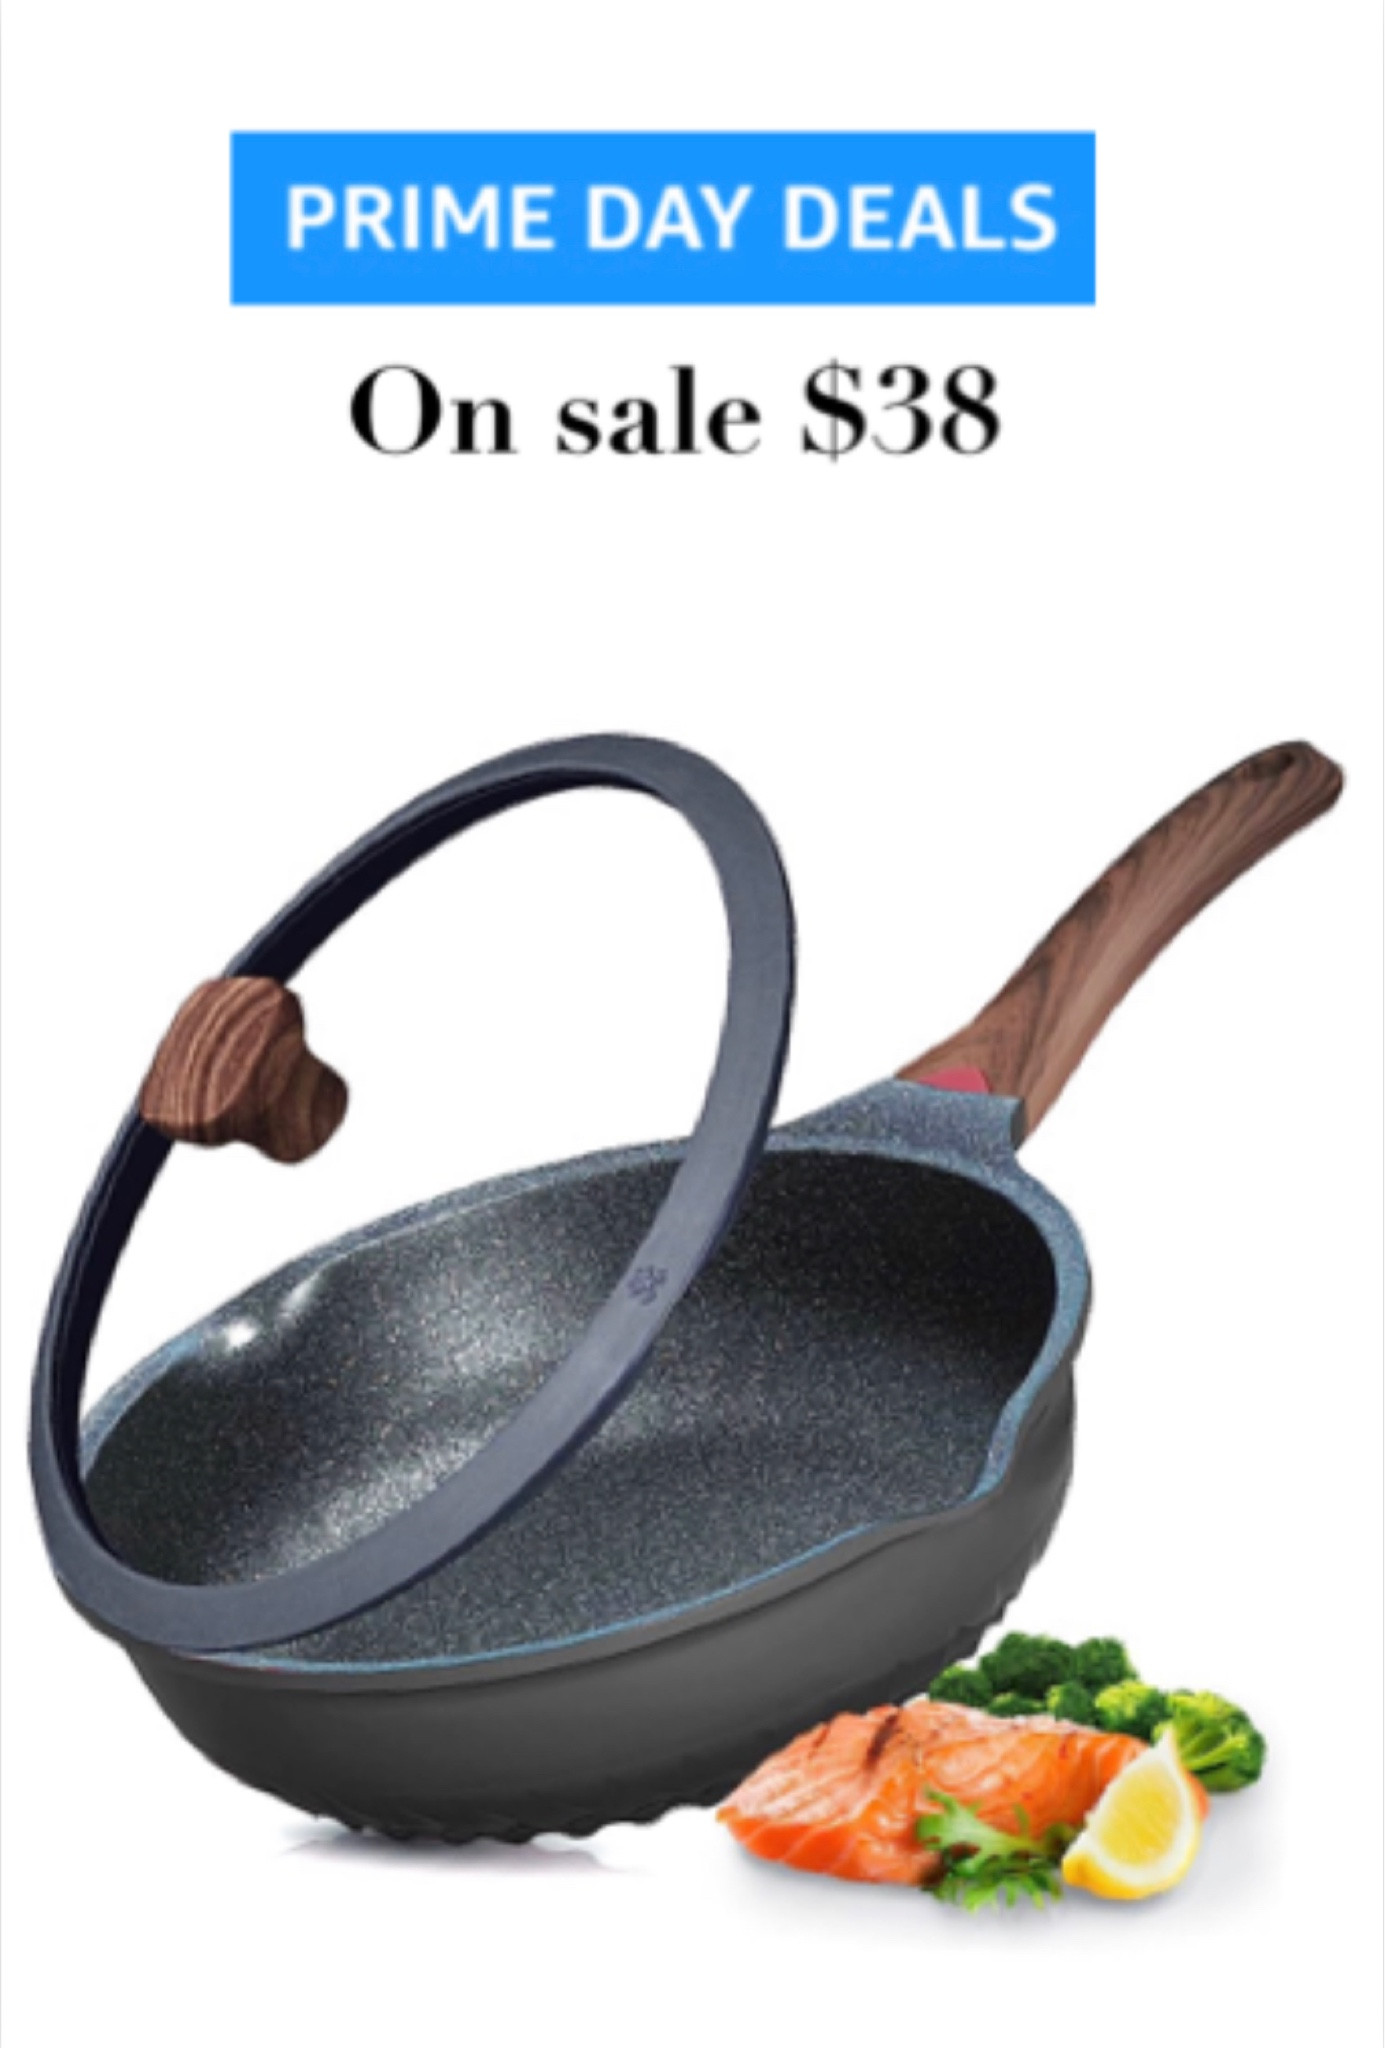 Vinchef Nonstick Deep Frying Pan … curated on LTK